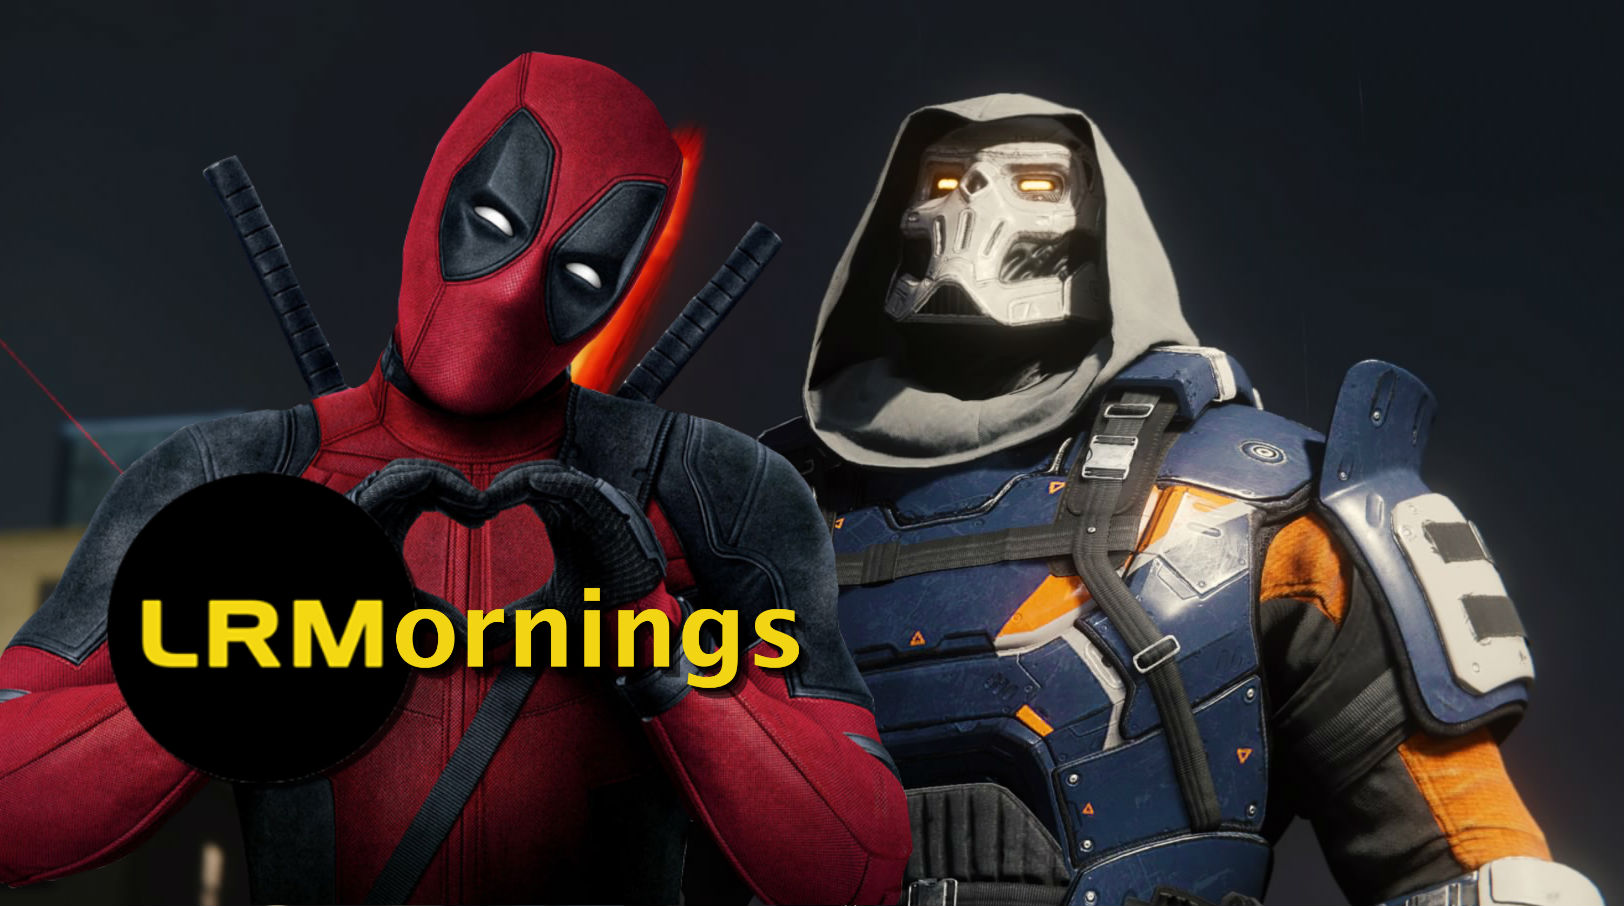 Taskmaster Being Wasted, The Eternals Cast Concerning? | LRMornings